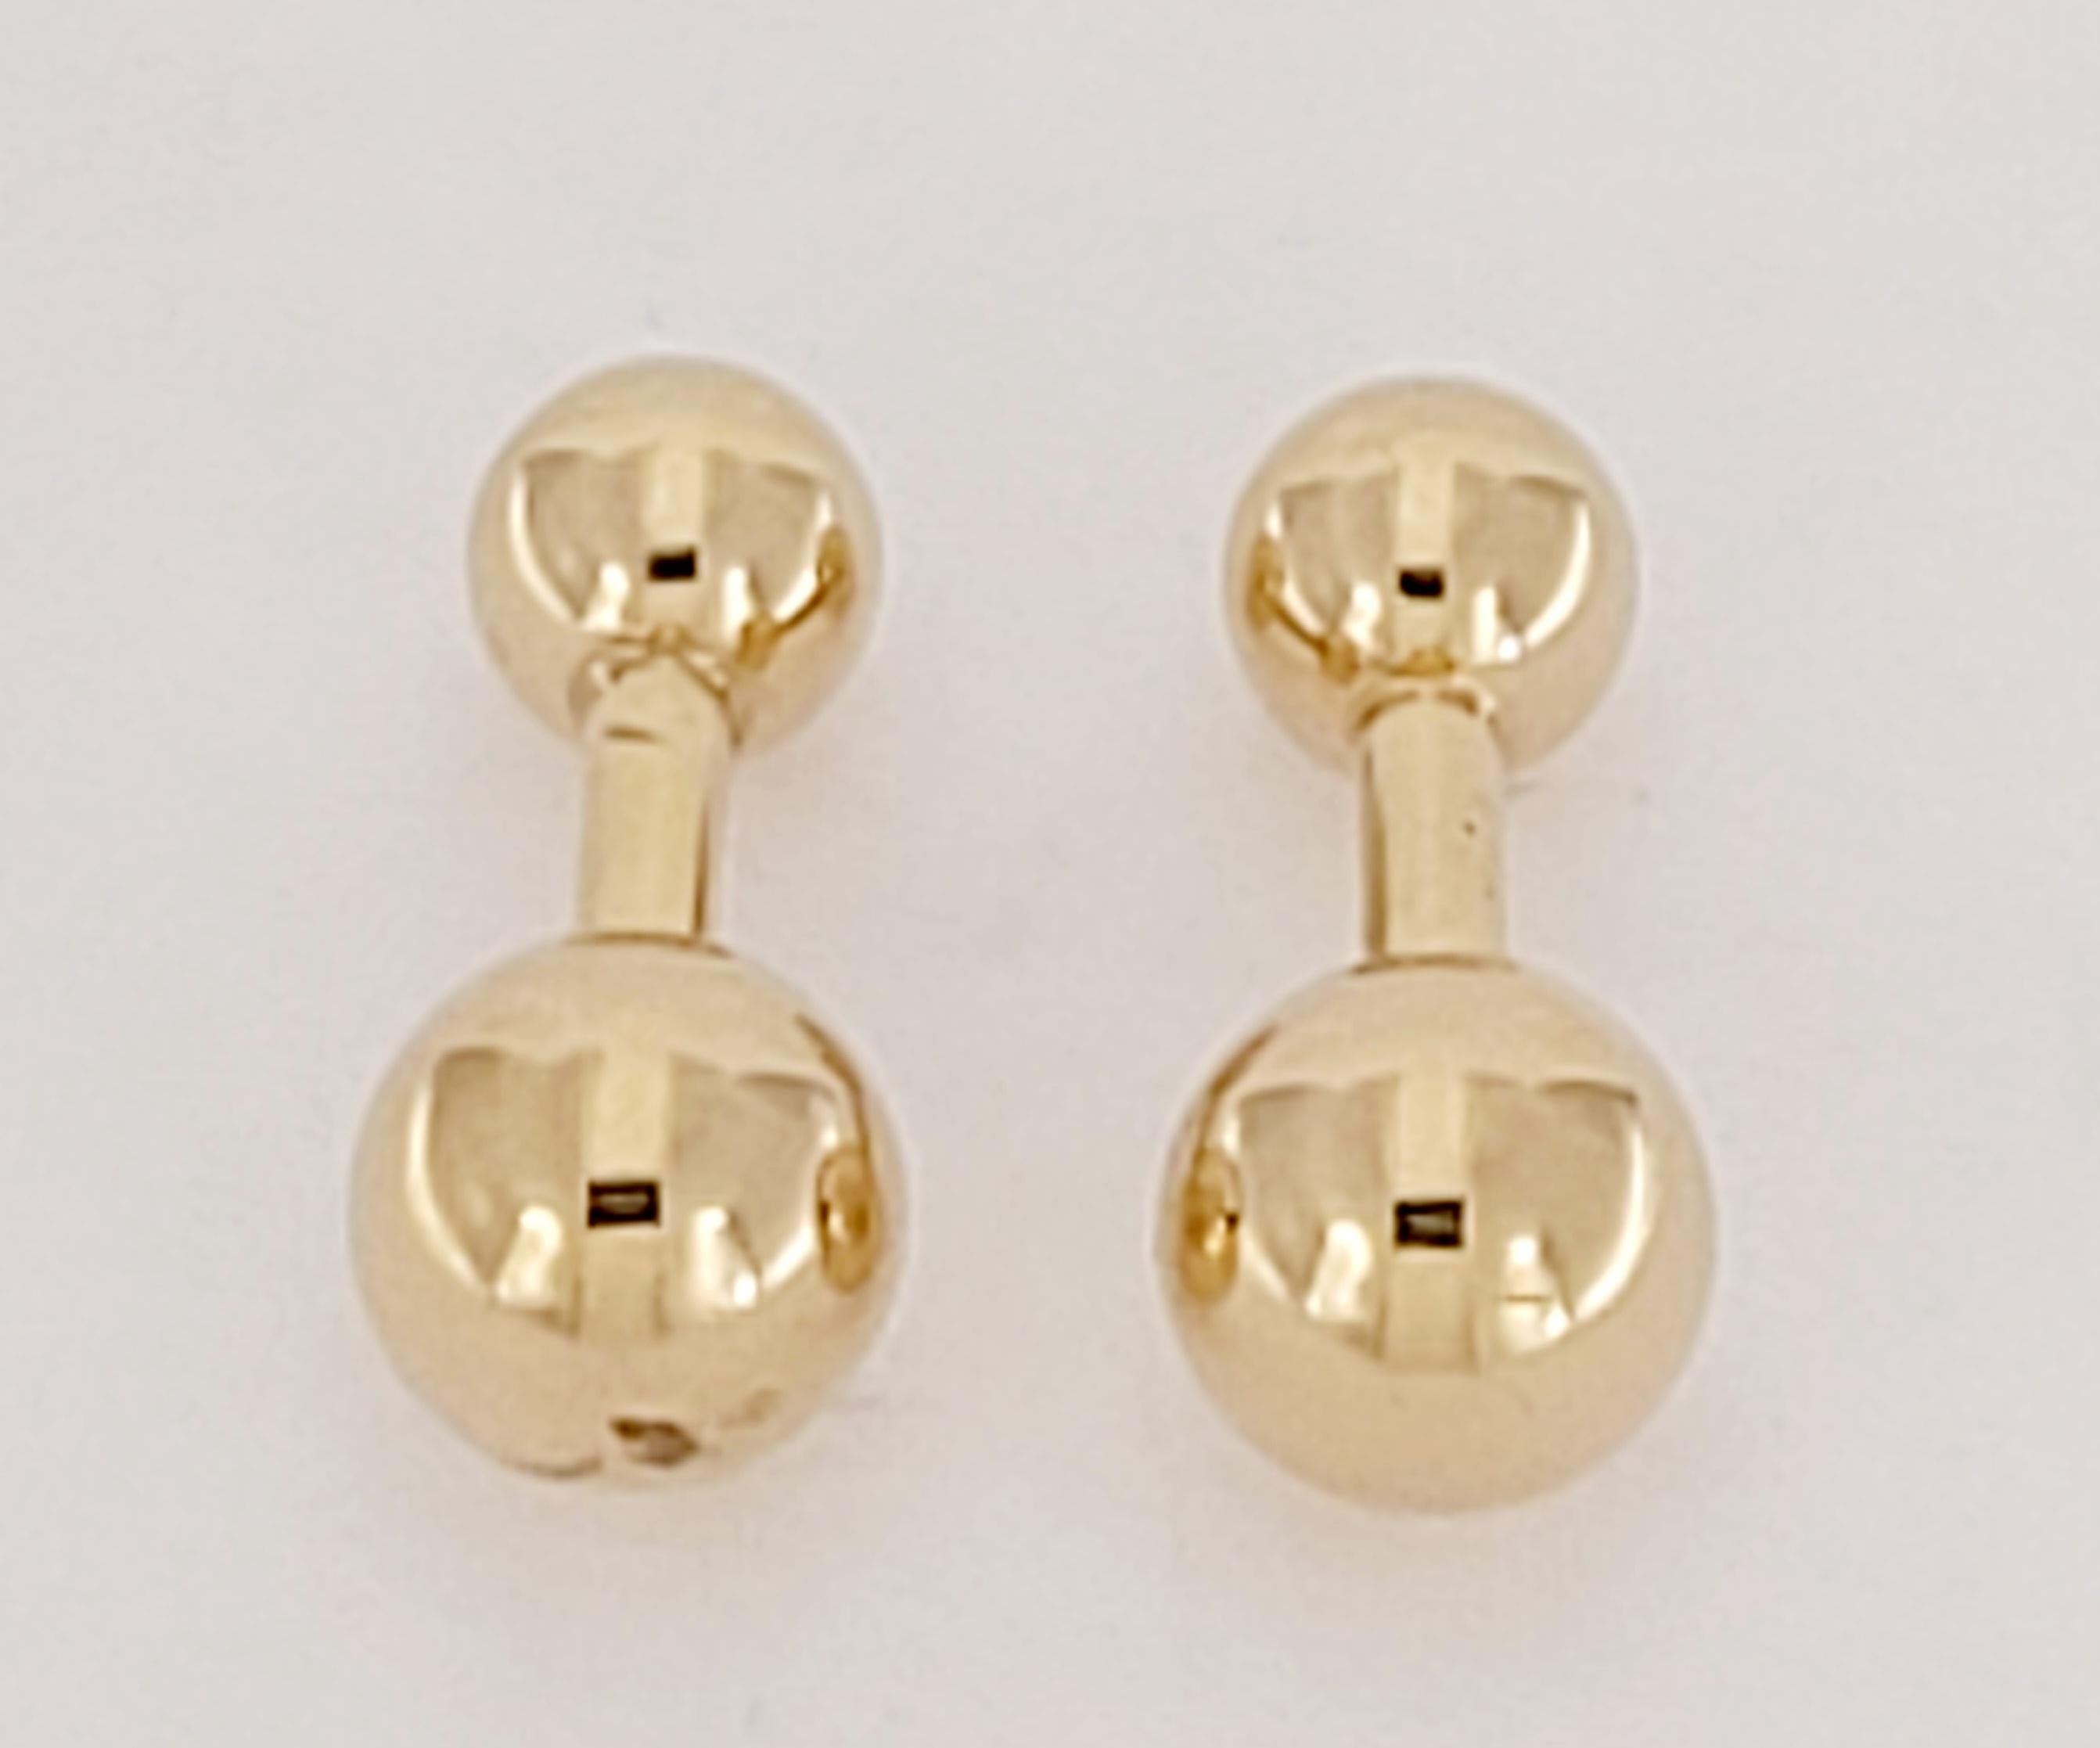 Brand Tiffany & co
Mint condition
Type cufflinks 
Metal yellow gold
metal purity 14k
cufflinks  weight 4.6 g
The cufflinks have 12.5 x 9.5mm gold ball 
